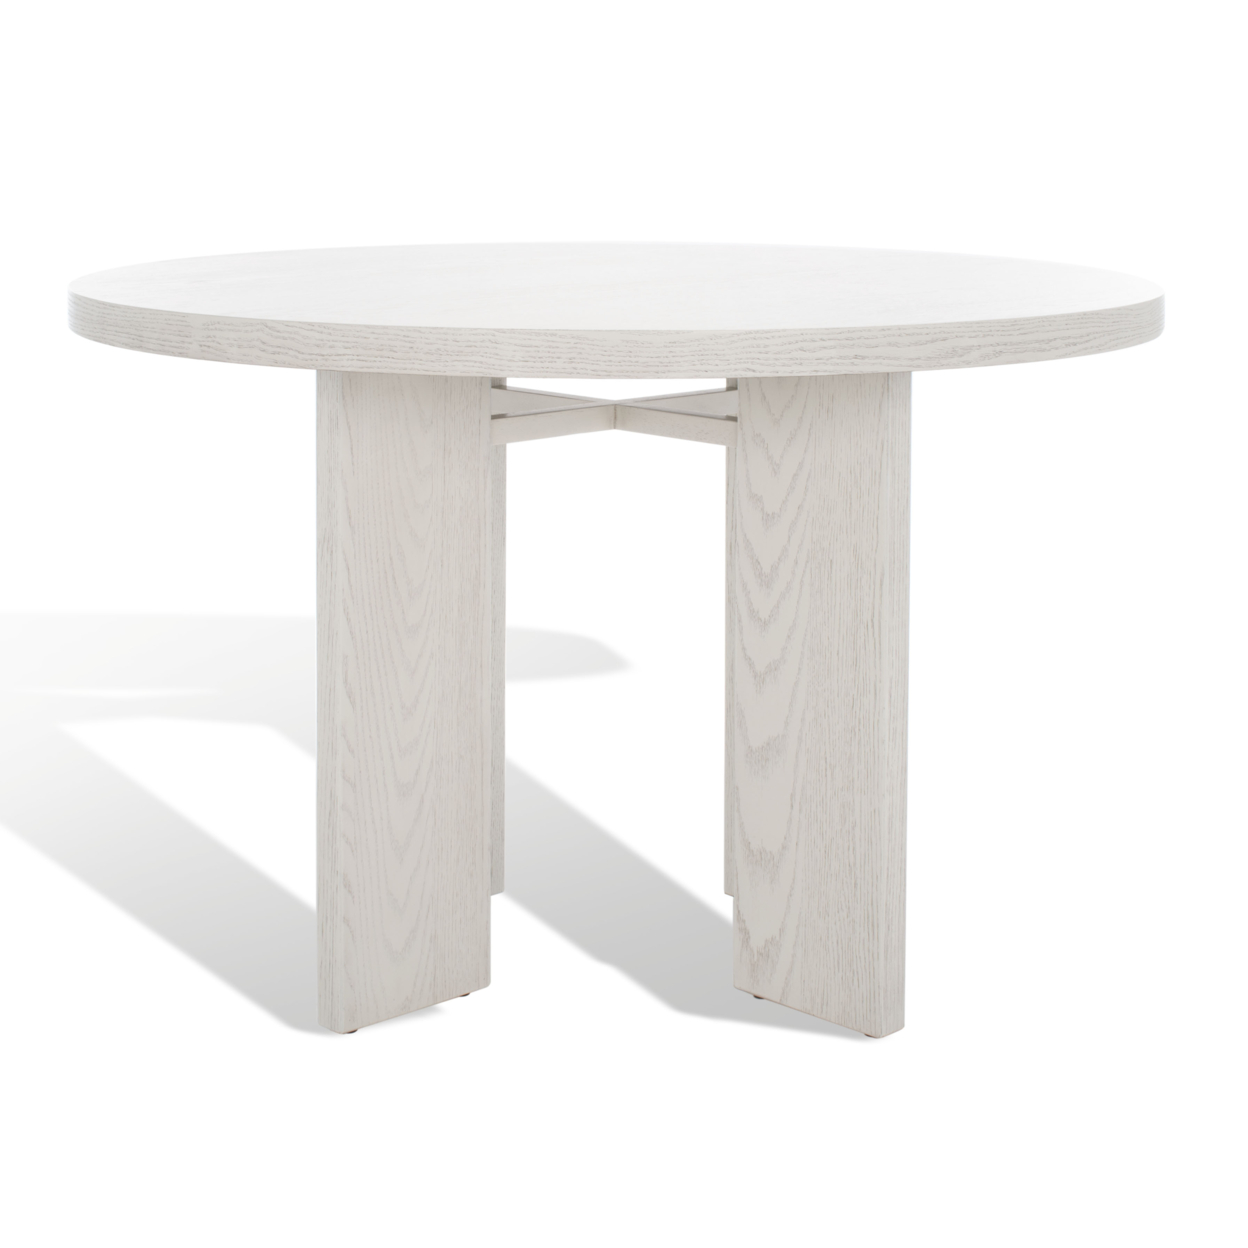 SAFAVIEH COUTURE Calamaria Round Wood Dn Table White Washed